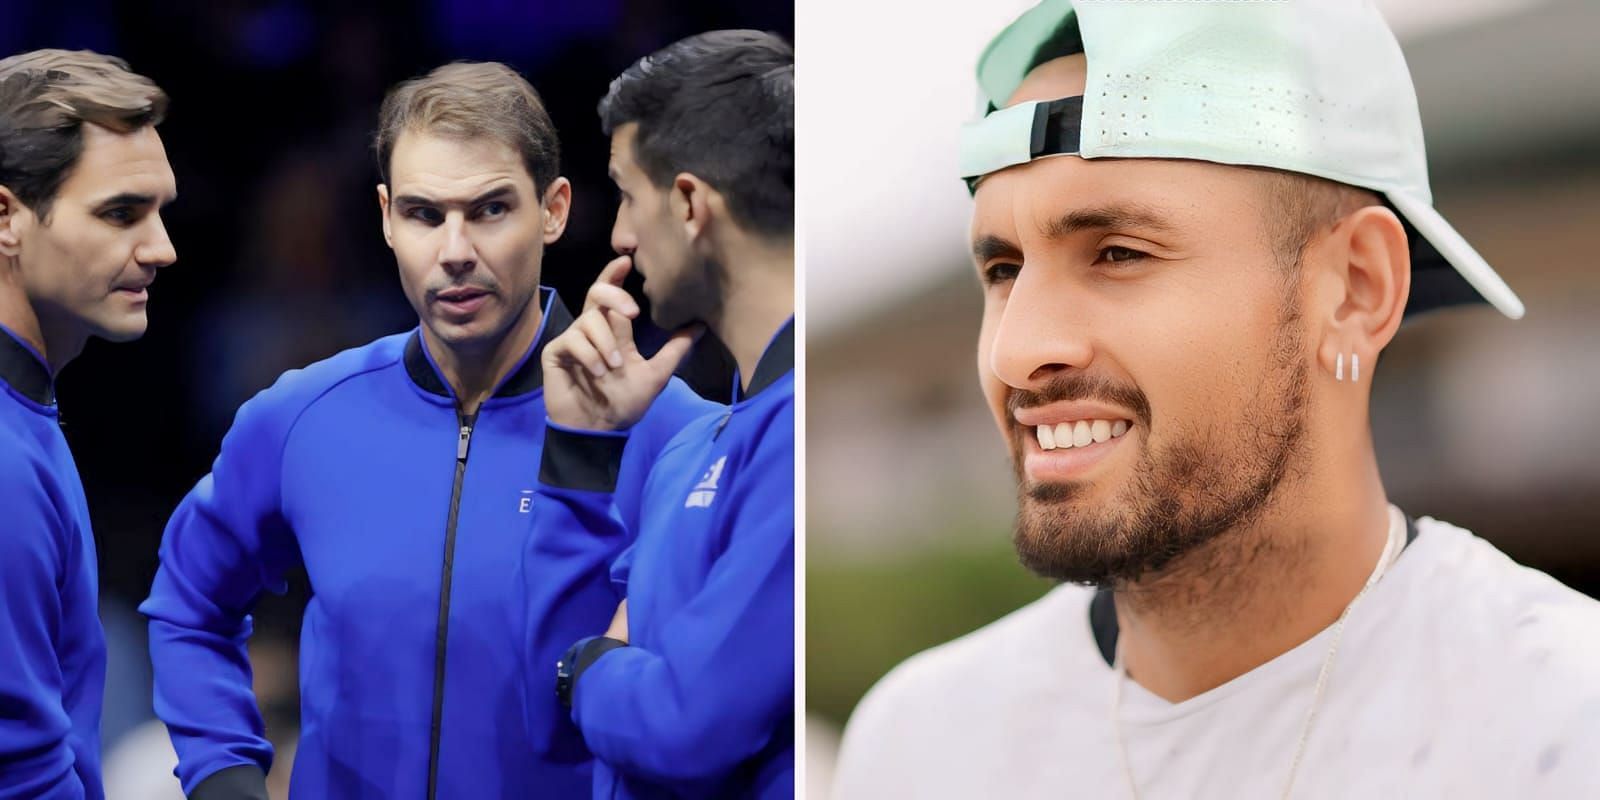 “I guess Roger Federer, Rafael Nadal & Novak Djokovic lost to a flop” - Nick Kyrgios hits back at Grayson Waller after WWE star's teasing